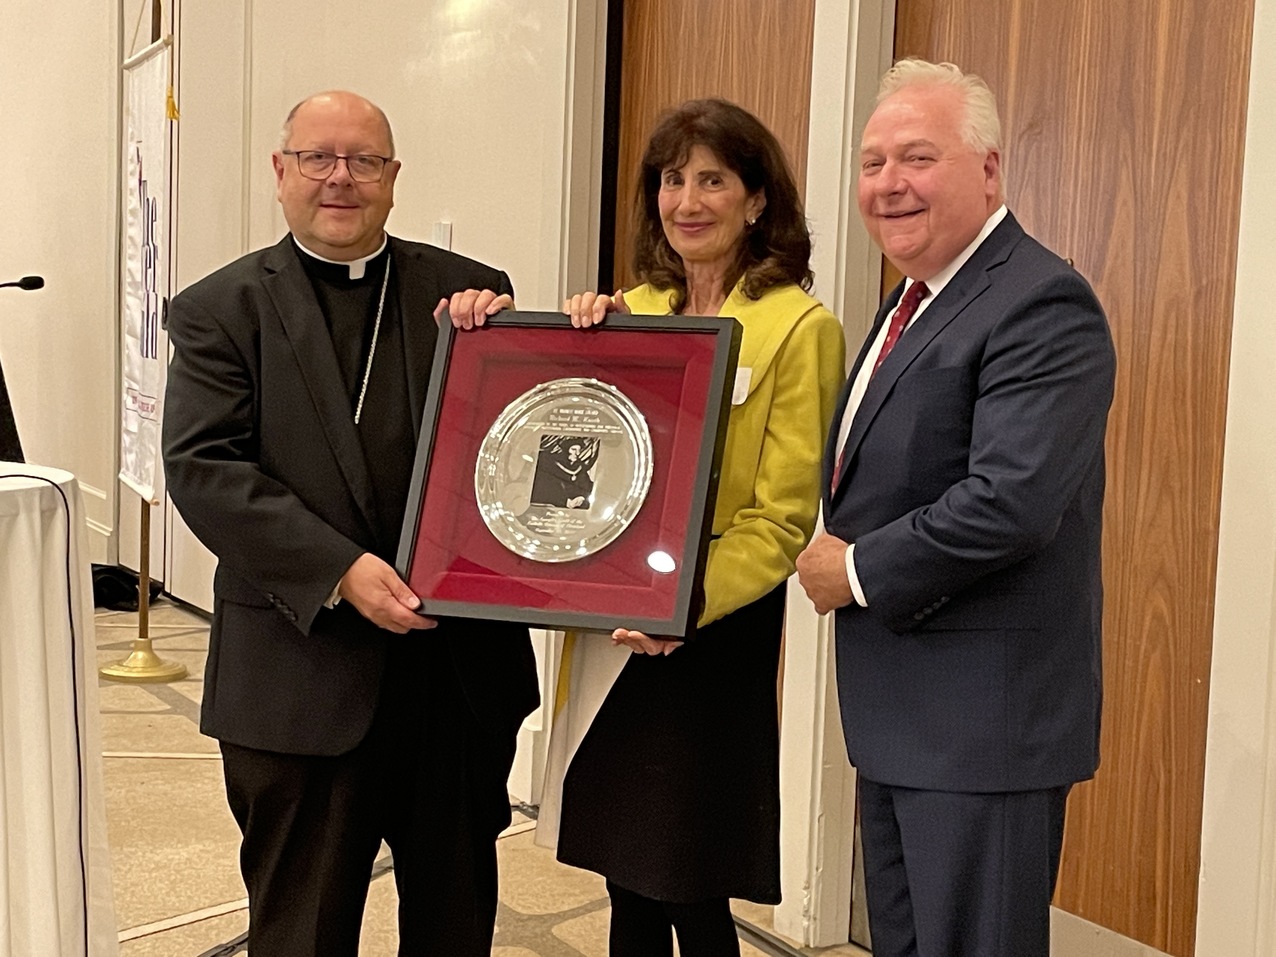 Lawyers Guild honors Dick Knoth with St. Thomas More Award after annual Red Mass